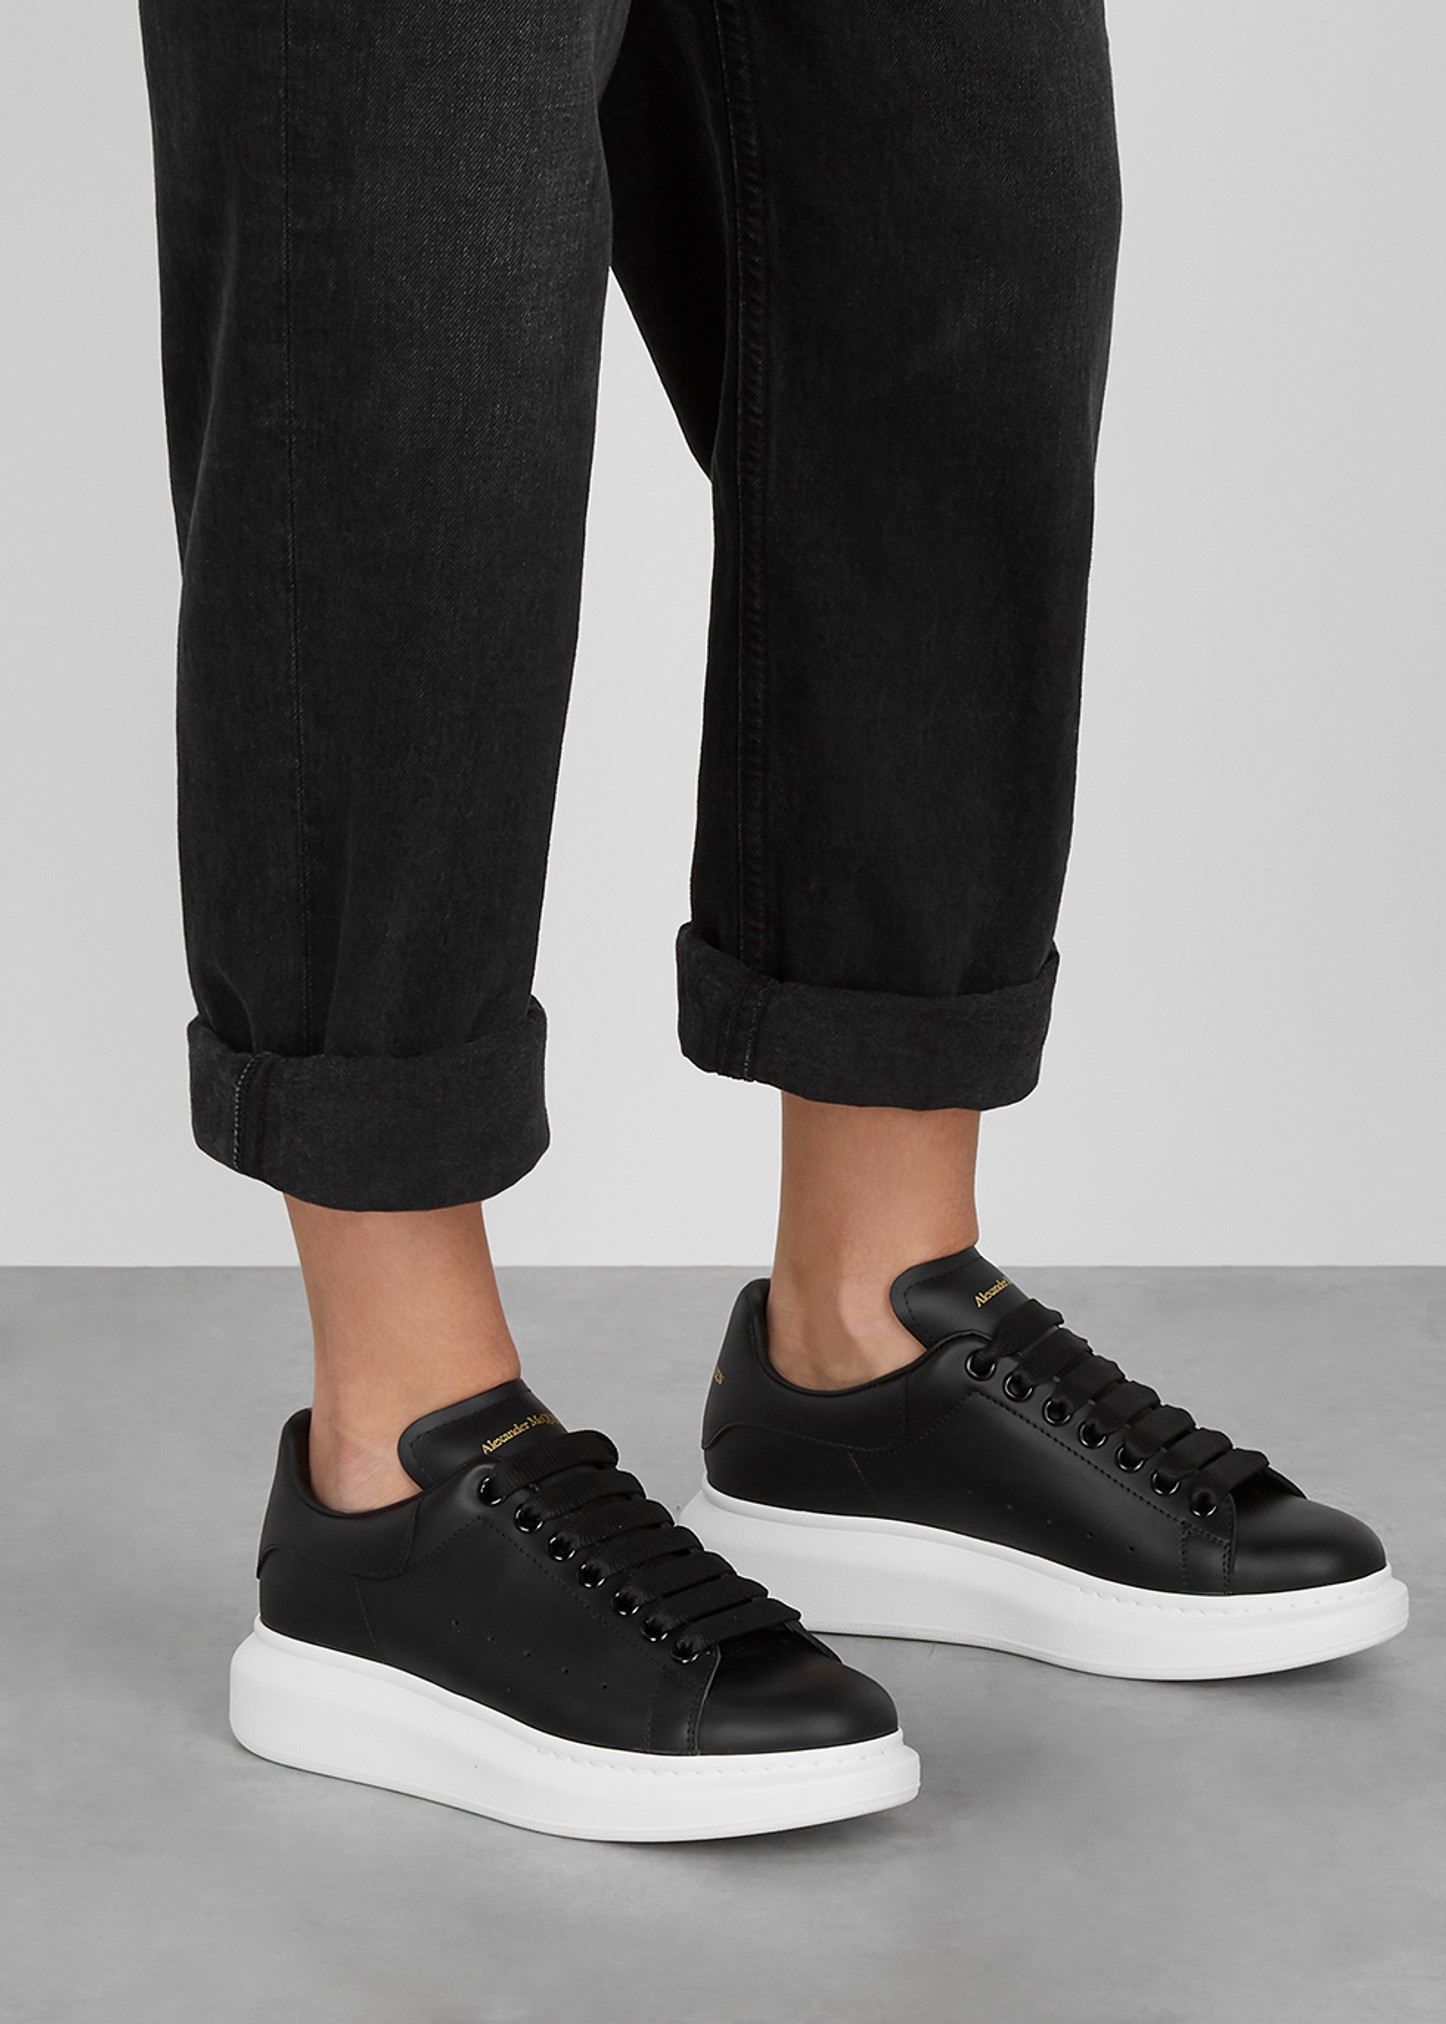 Oversized black leather sneakers - 5